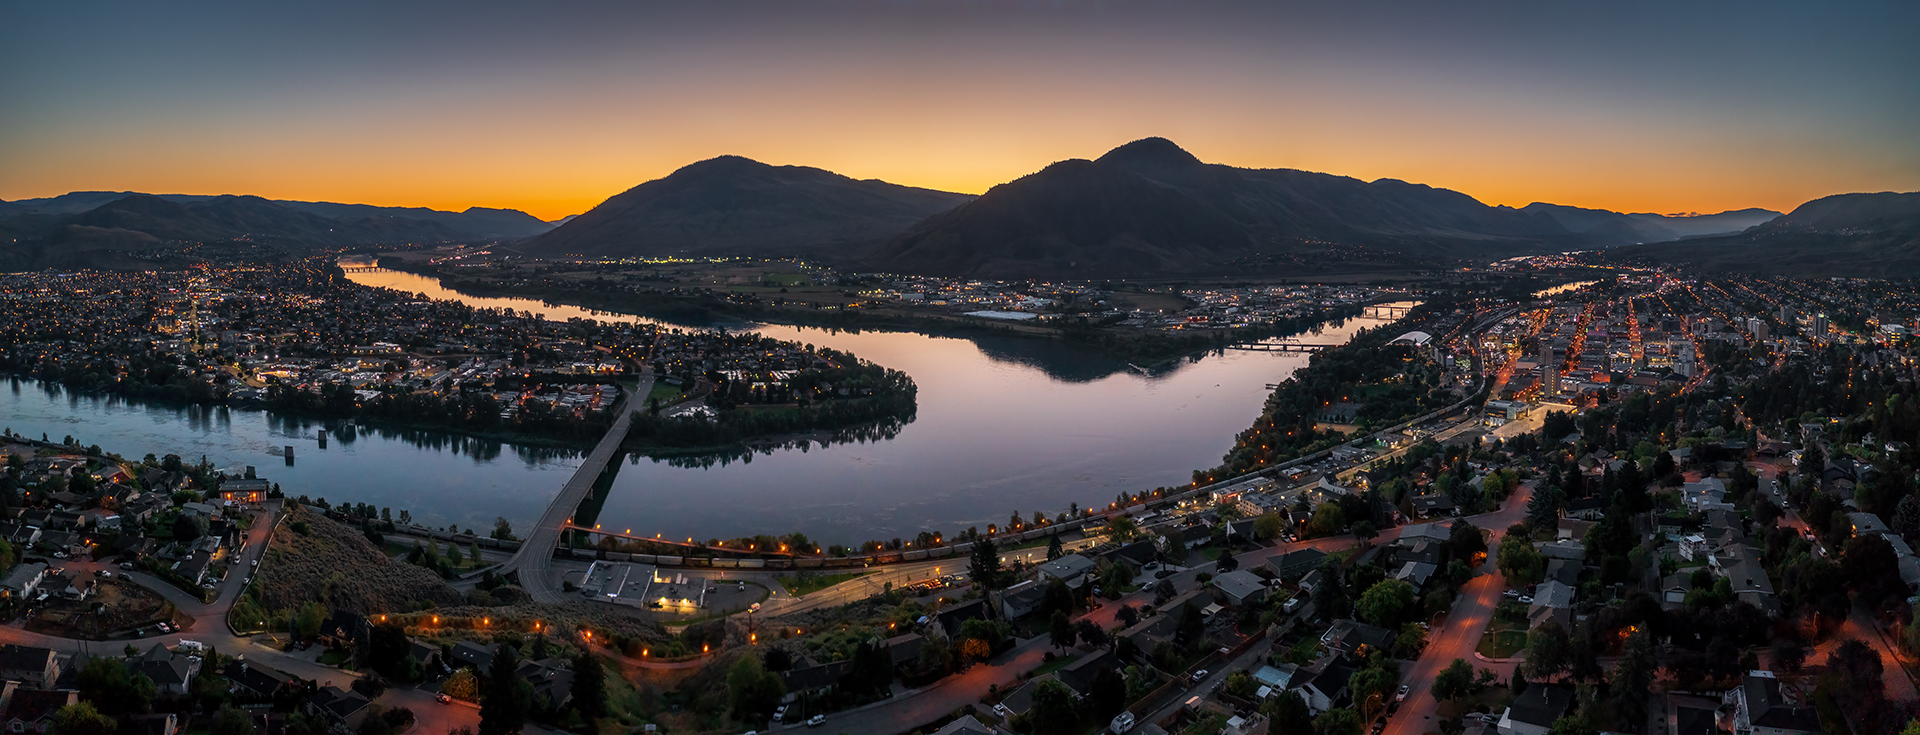 Kamloops city aerial view HDR at sunset with lights 2